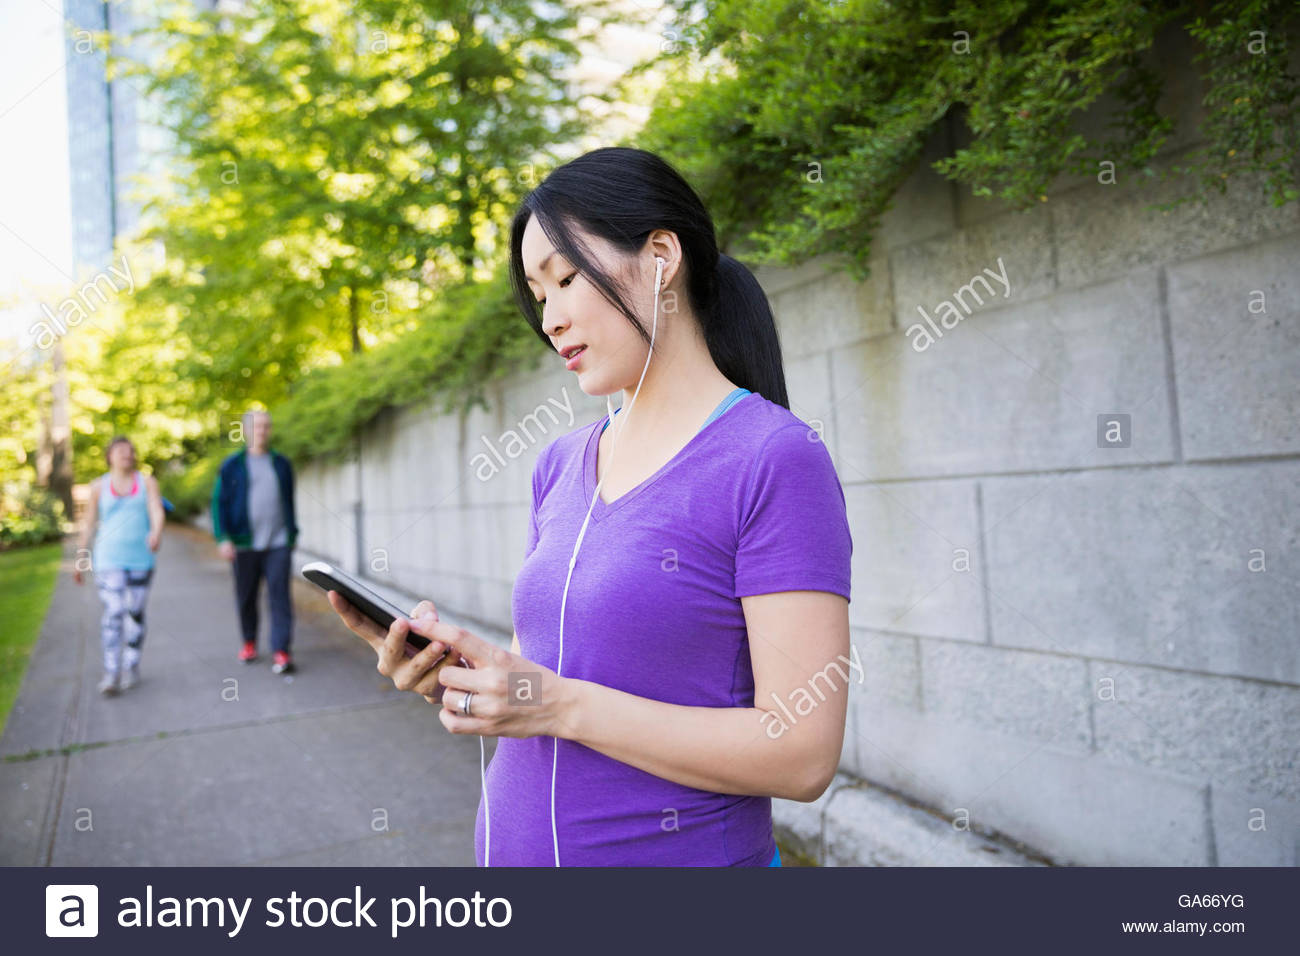 Pregnant woman with headphones using cell phone on city sidewalk Stock Photo